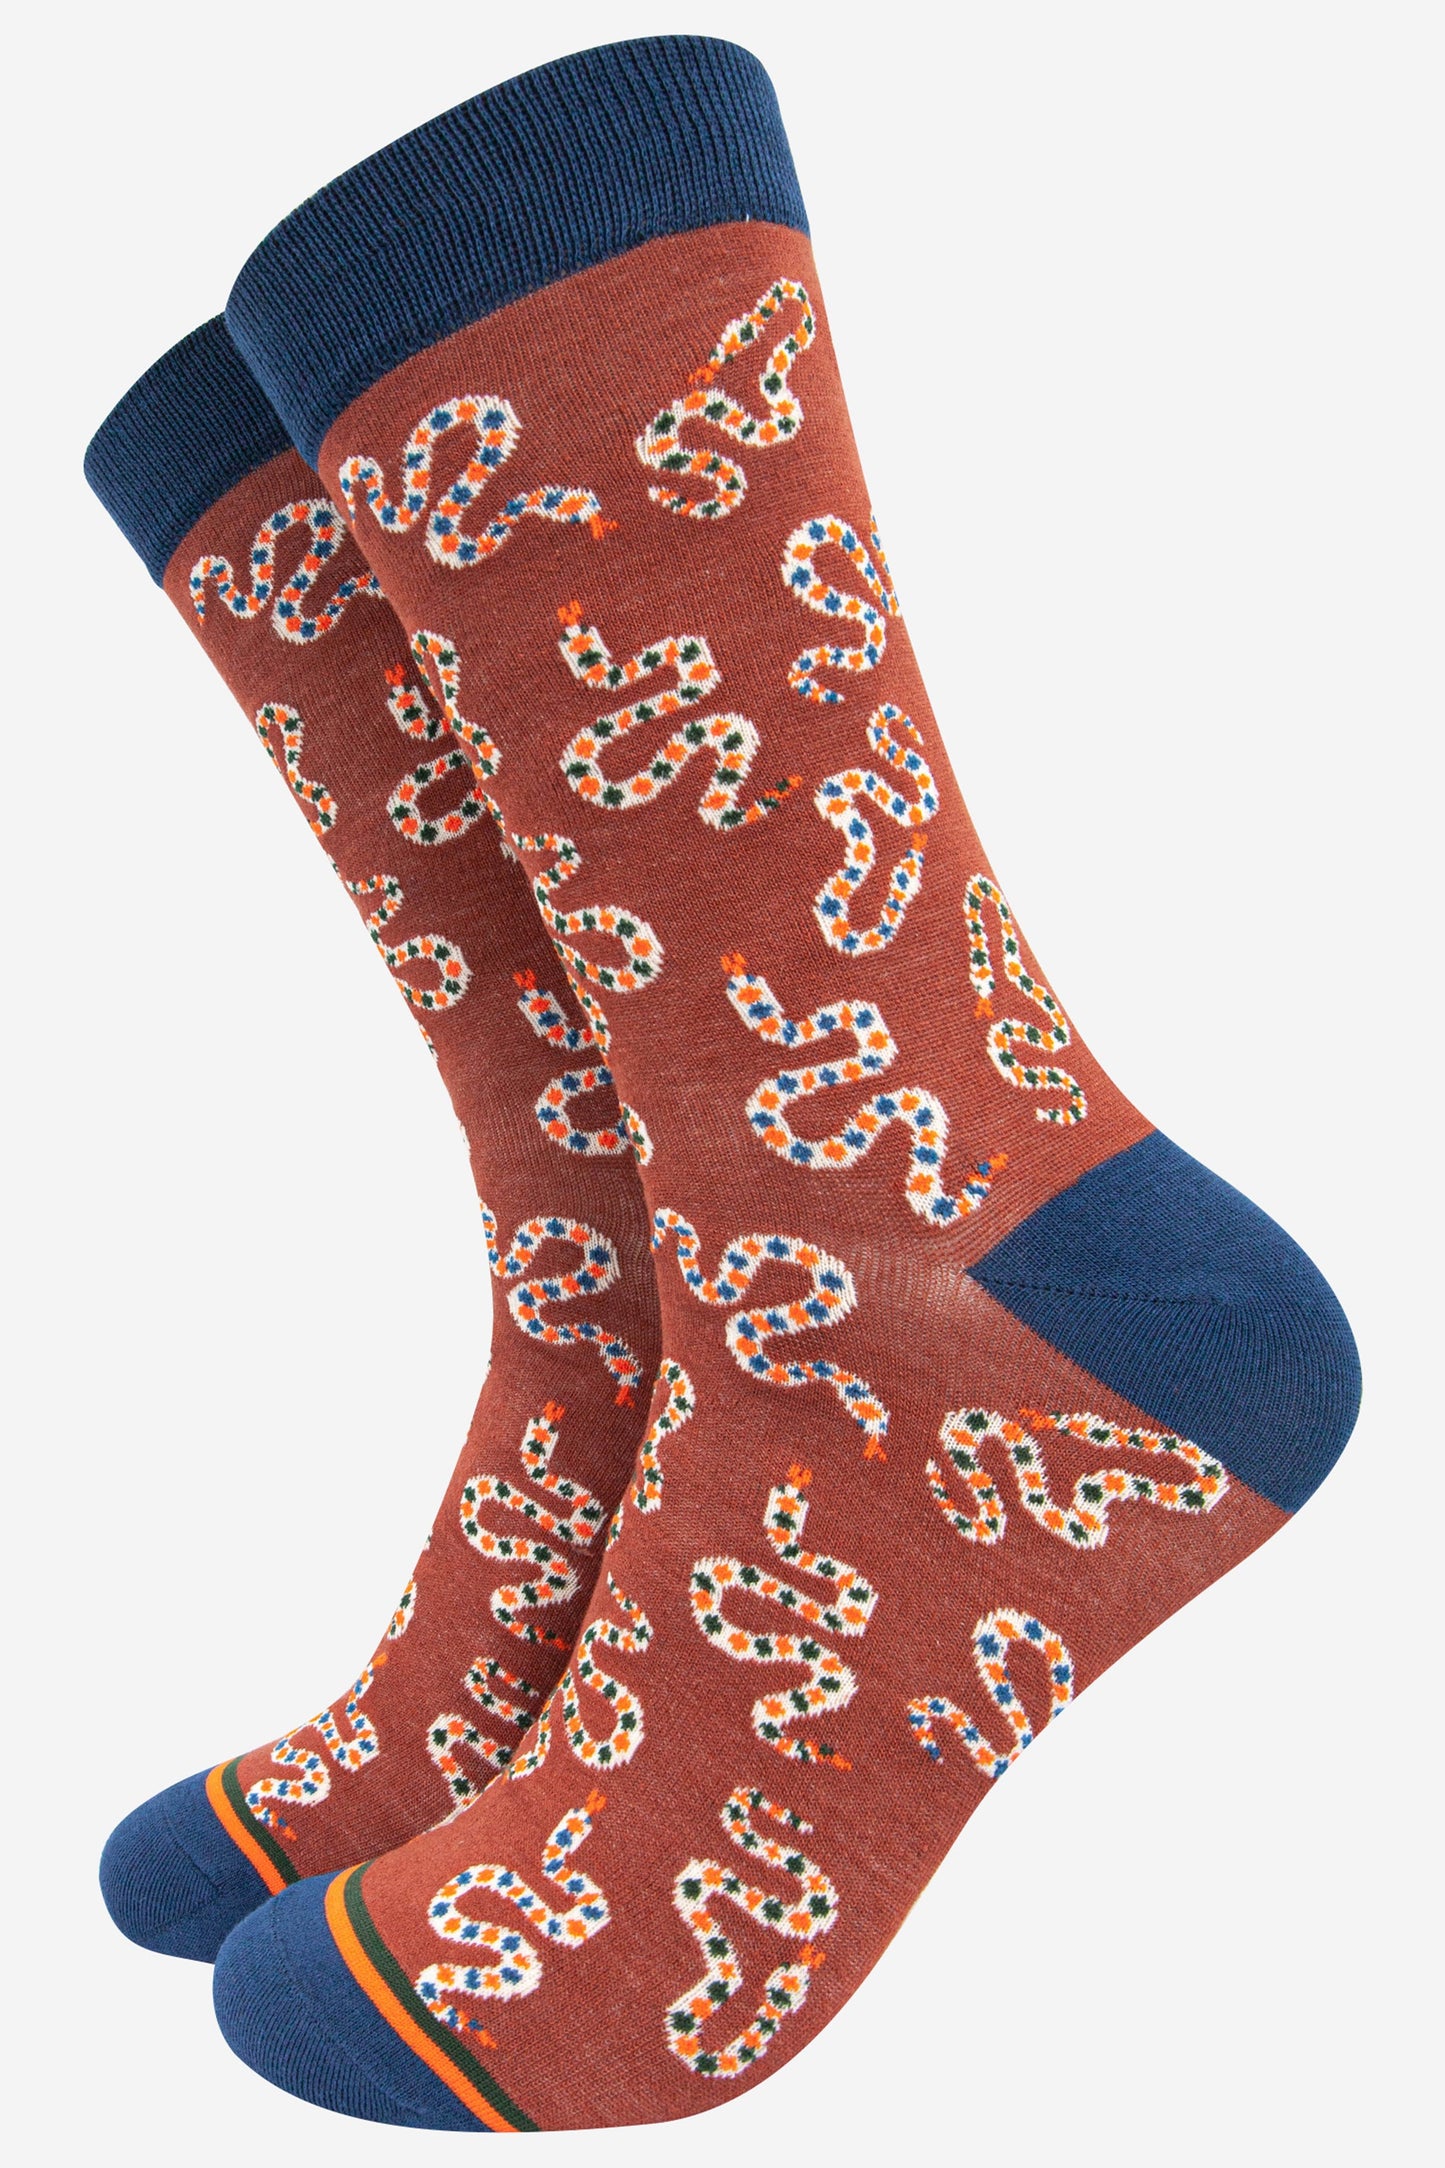 burnt orange bamboo socks with an all over pattern of winding rattle snakes and navy blue heel, toe and cuff